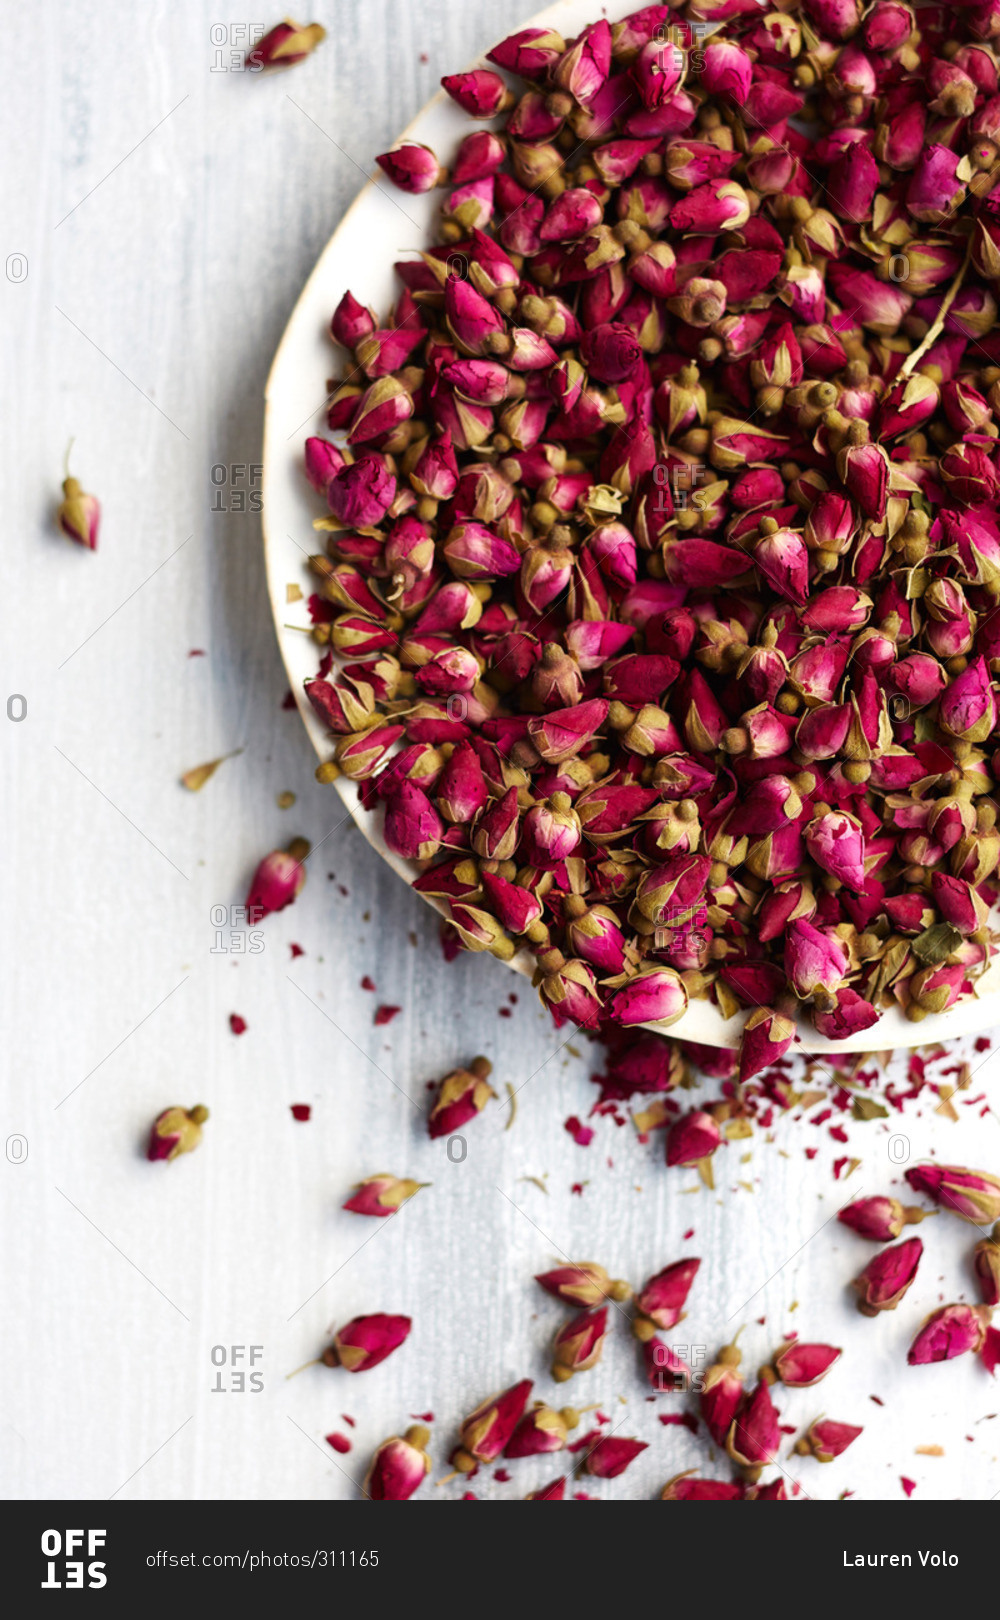 Bowl of small rose buds used as an ingredient in a cake